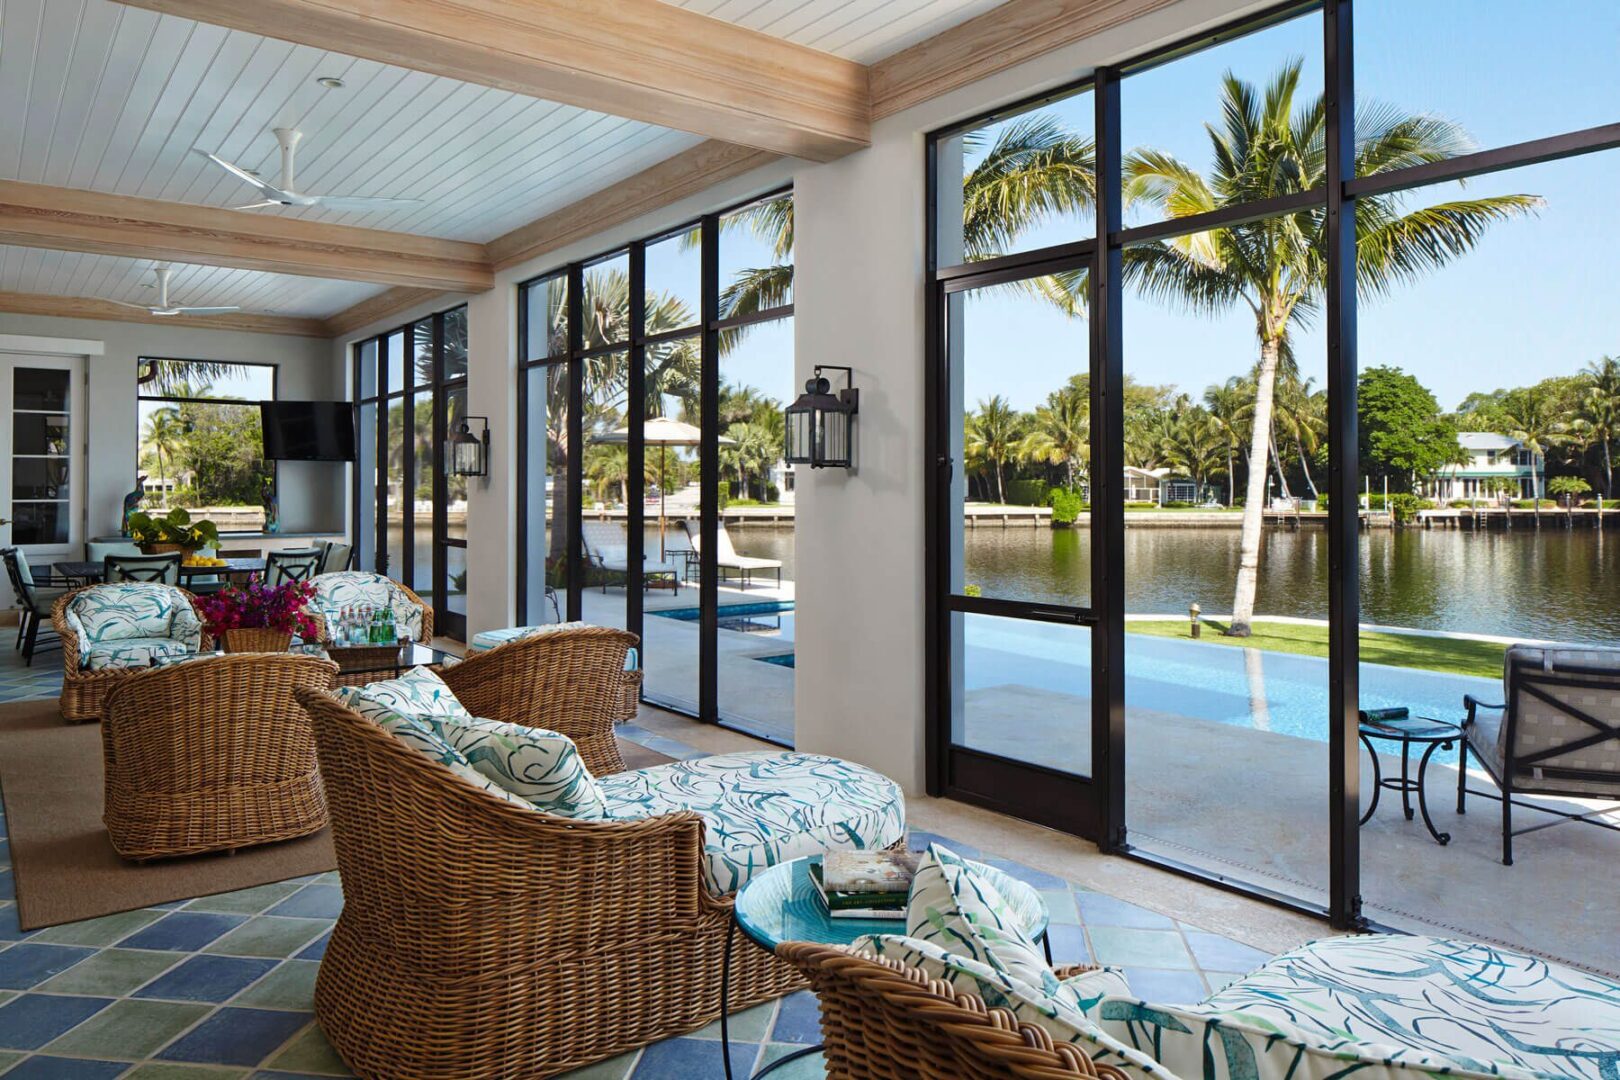 A living room with sliding glass doors and palm trees.